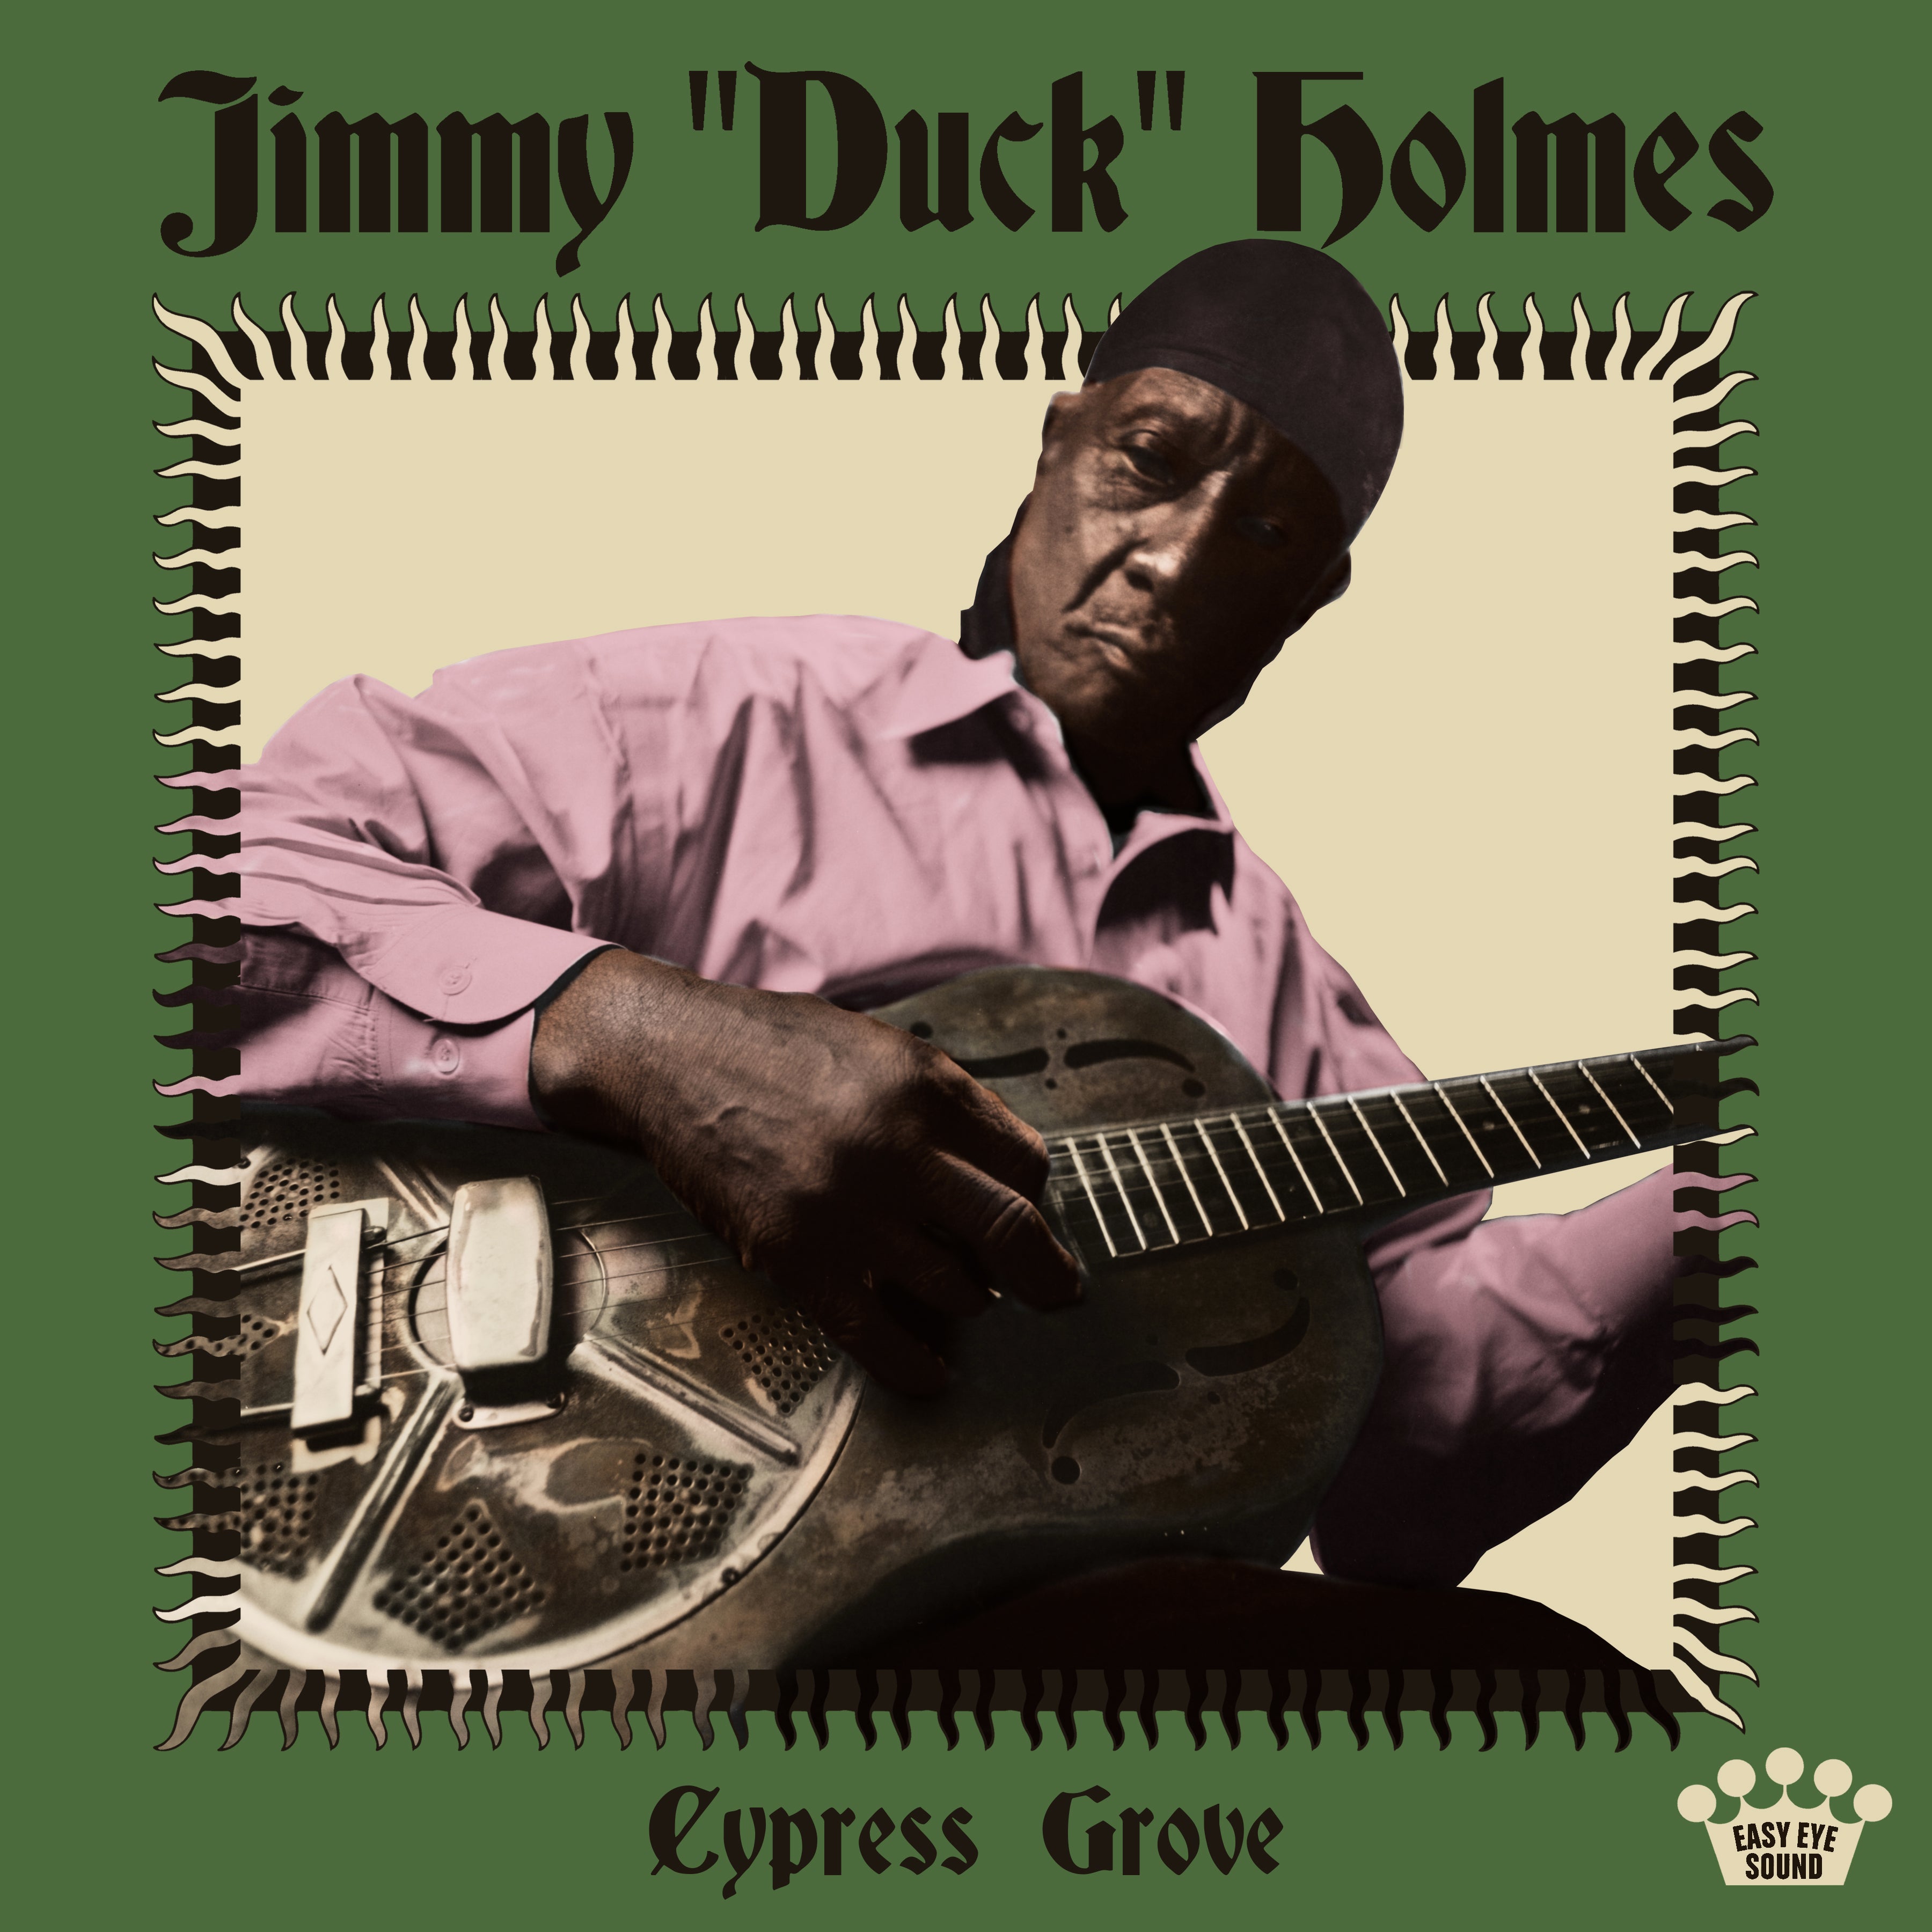 Jimmy "Duck" Holmes releases his new album, 'Cypress Grove'